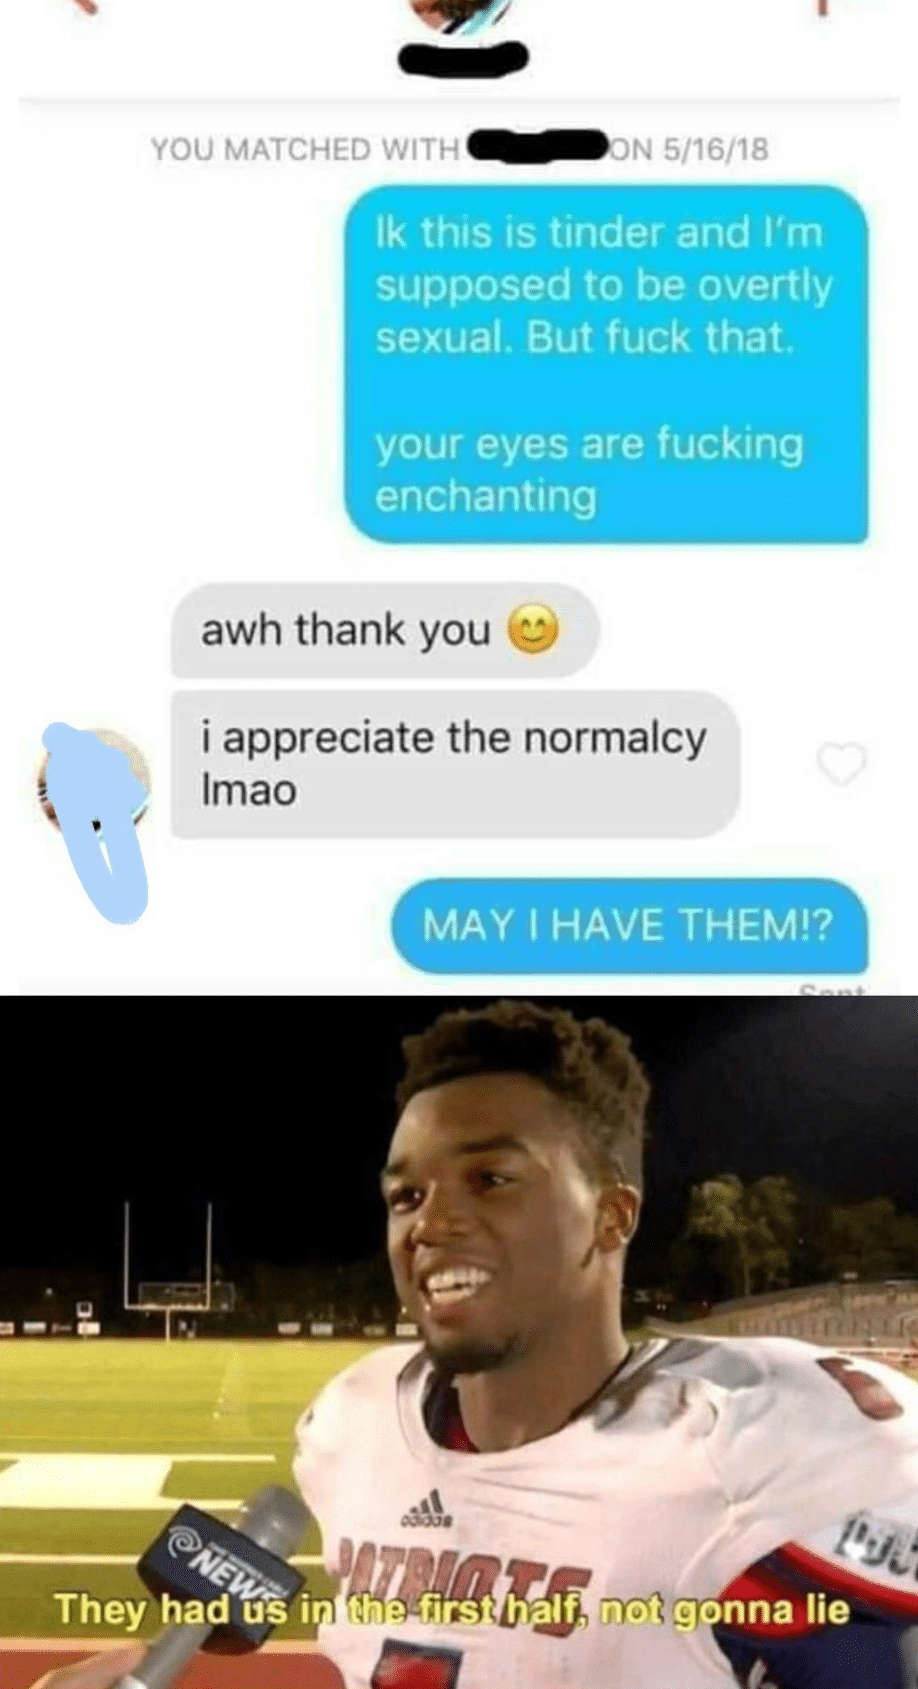 Funny, Naruto, XIII, Uchiha, Sasuke, Morty other memes Funny, Naruto, XIII, Uchiha, Sasuke, Morty text: YOU MATCHED WITH DN 5/16/18 1k this is tinder and I'm supposed to be overtly sexual. But fuck that. your eyes are fucking enchanting awh thank you i appreciate the normalcy Imao They had us i MAY I HAVE THEM!? If riot.g nna lie 